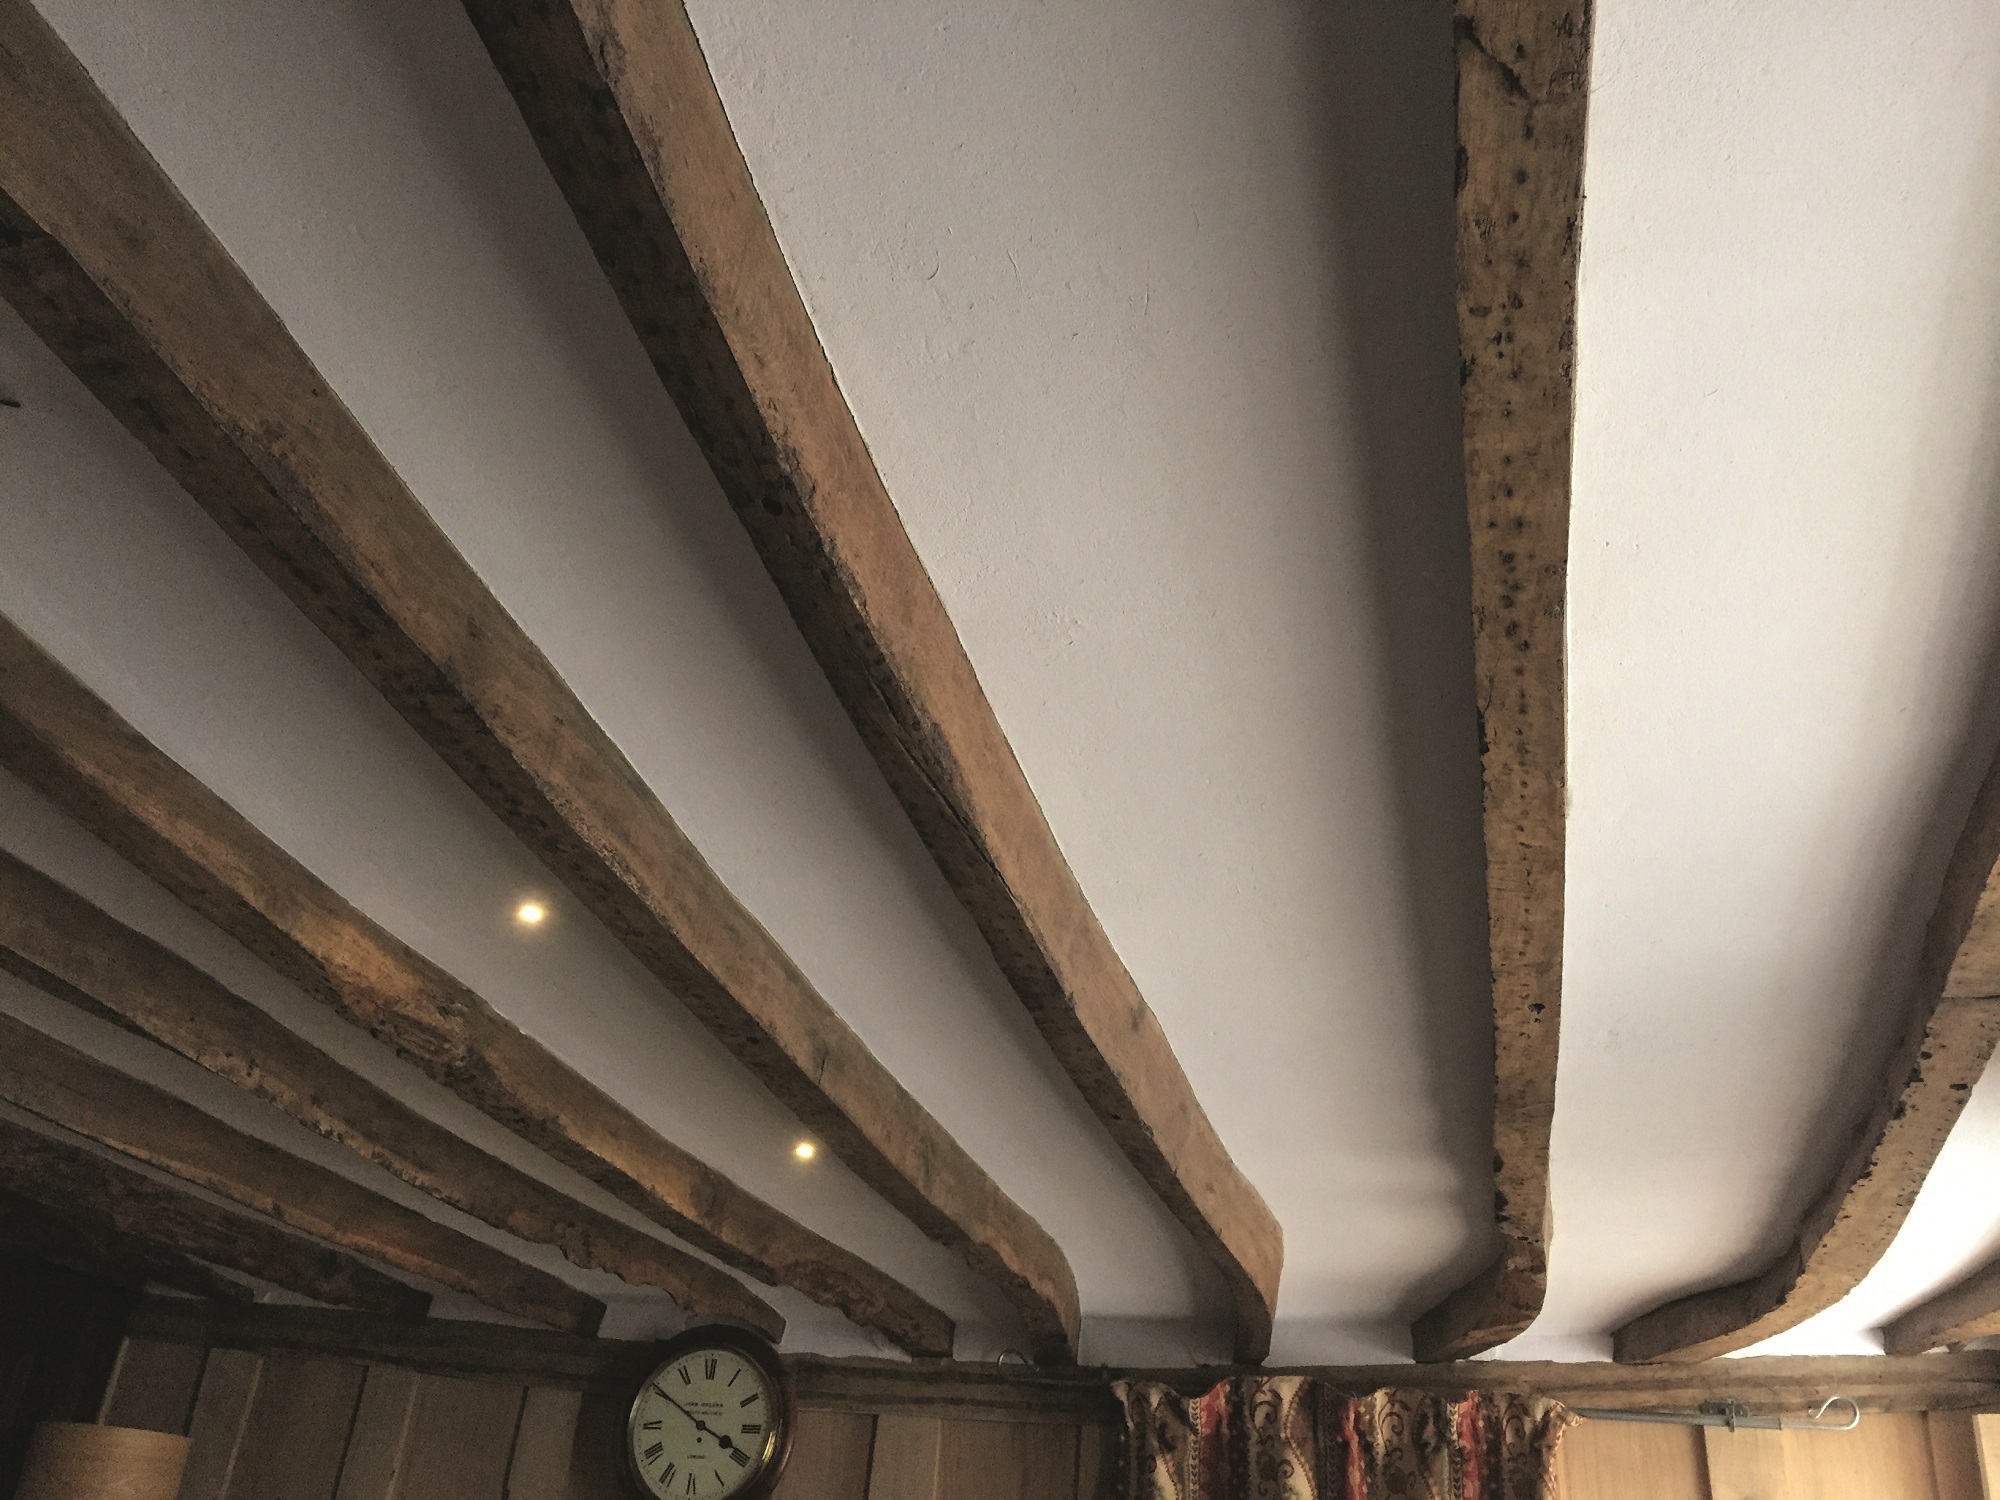 Completed ceiling